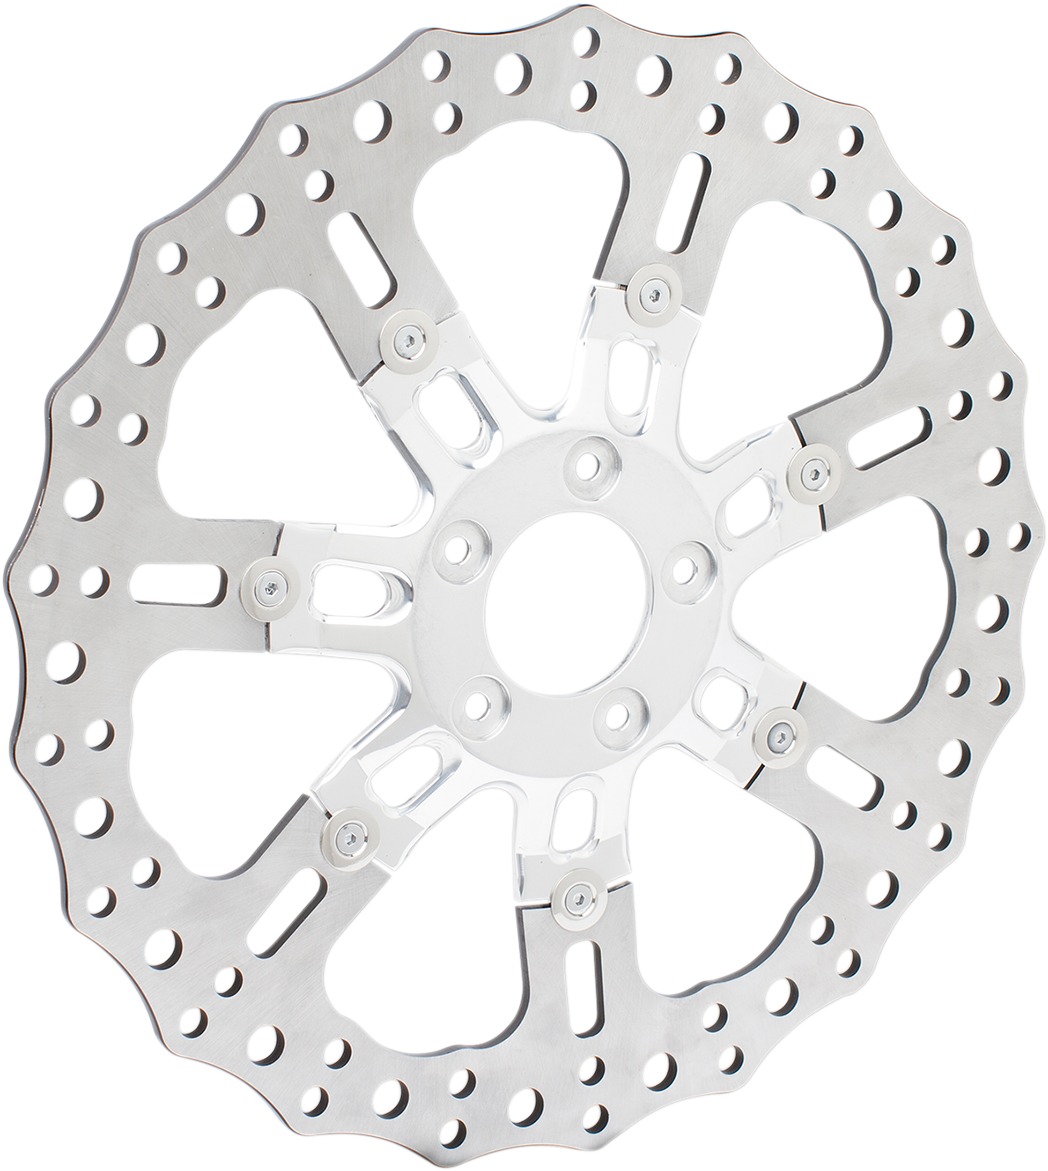 7-Valve Contour Floating Front Brake Rotor 356mm - For Harley - Click Image to Close